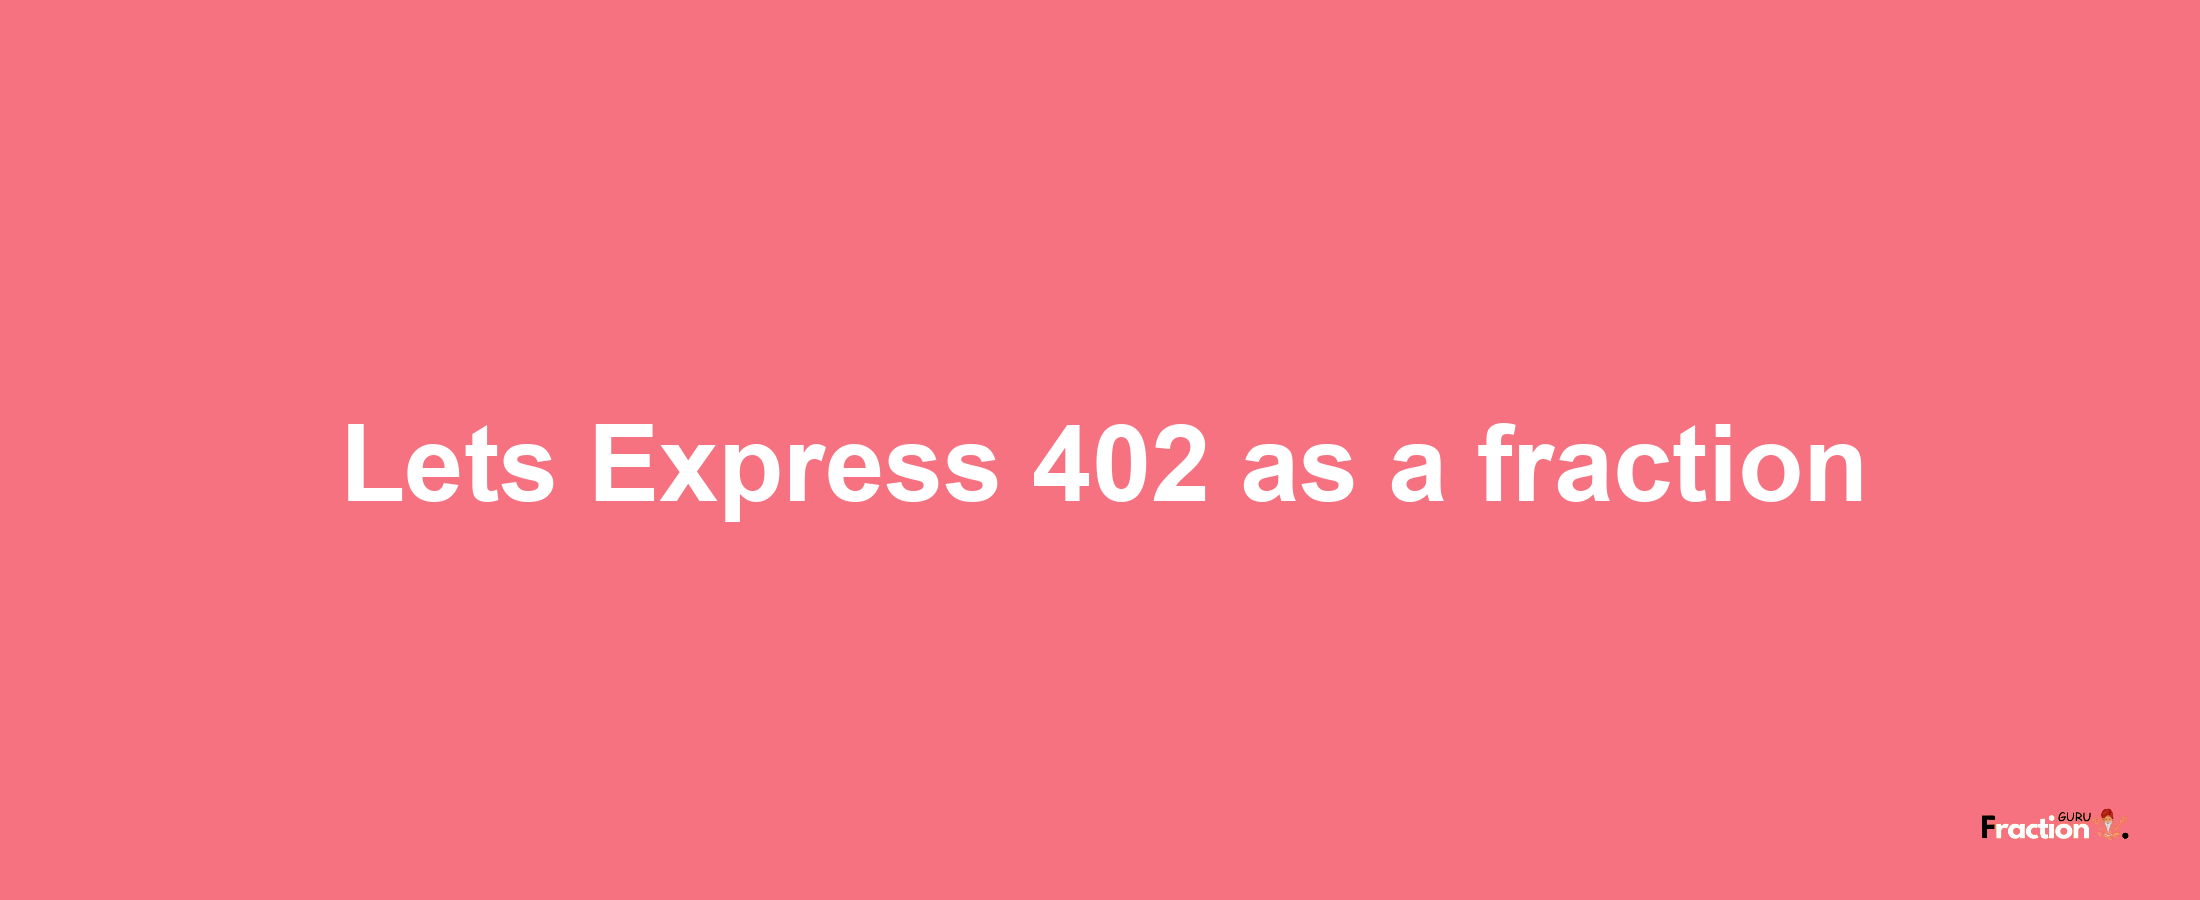 Lets Express 402 as afraction